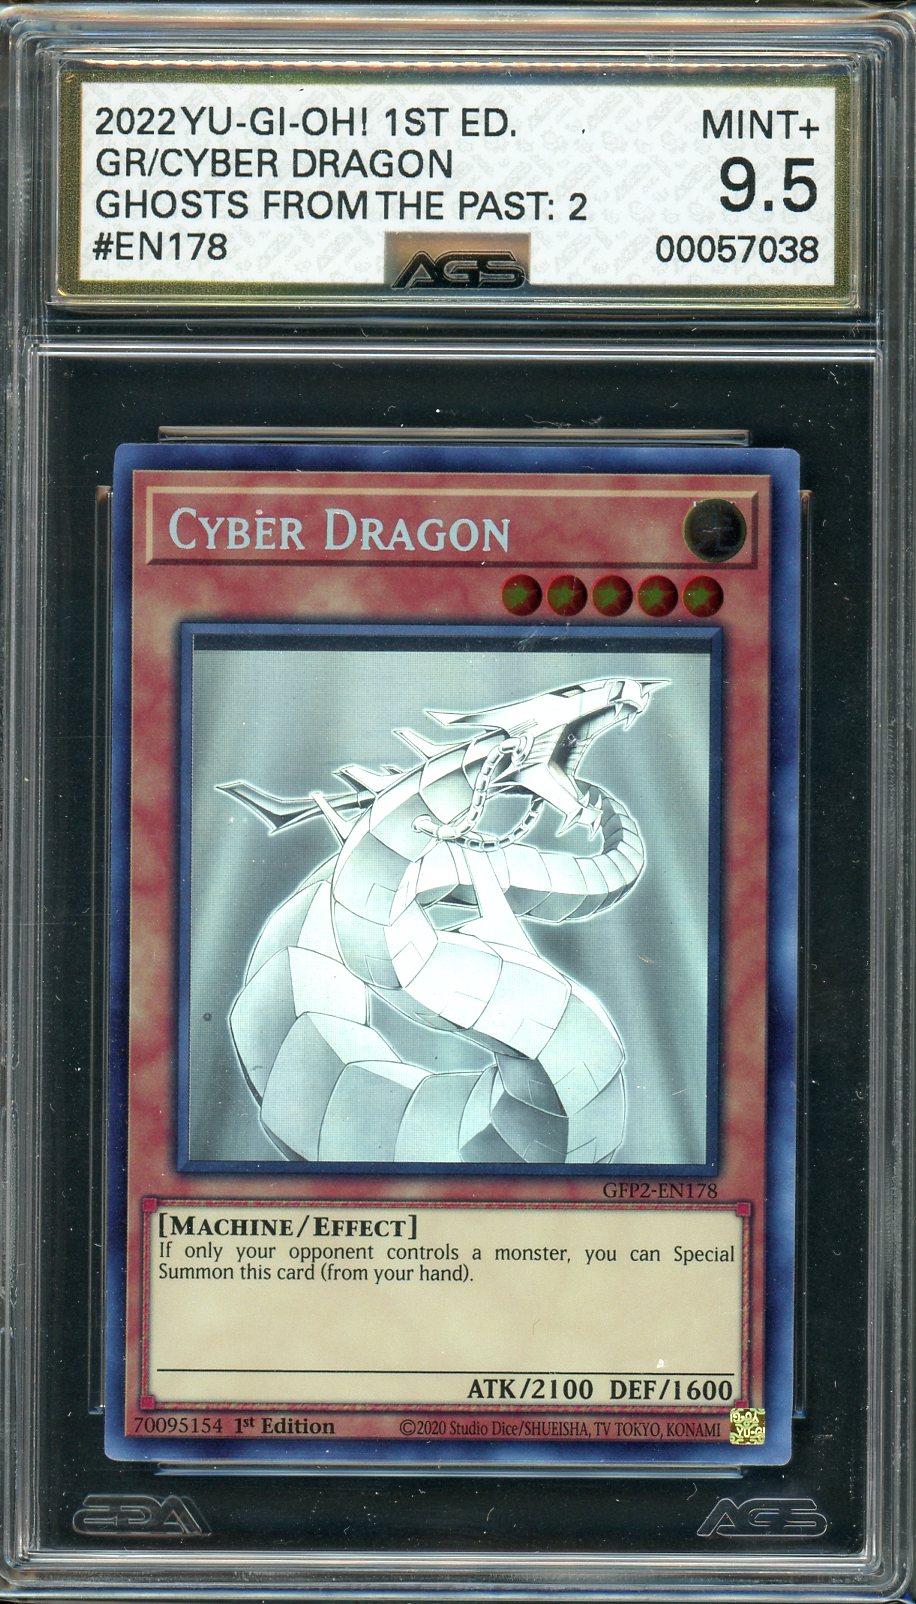 AGS (MINT+ 9.5) Cyber Dragon #EN178 - Ghosts From The Past The 2nd Haunting (#00057038)